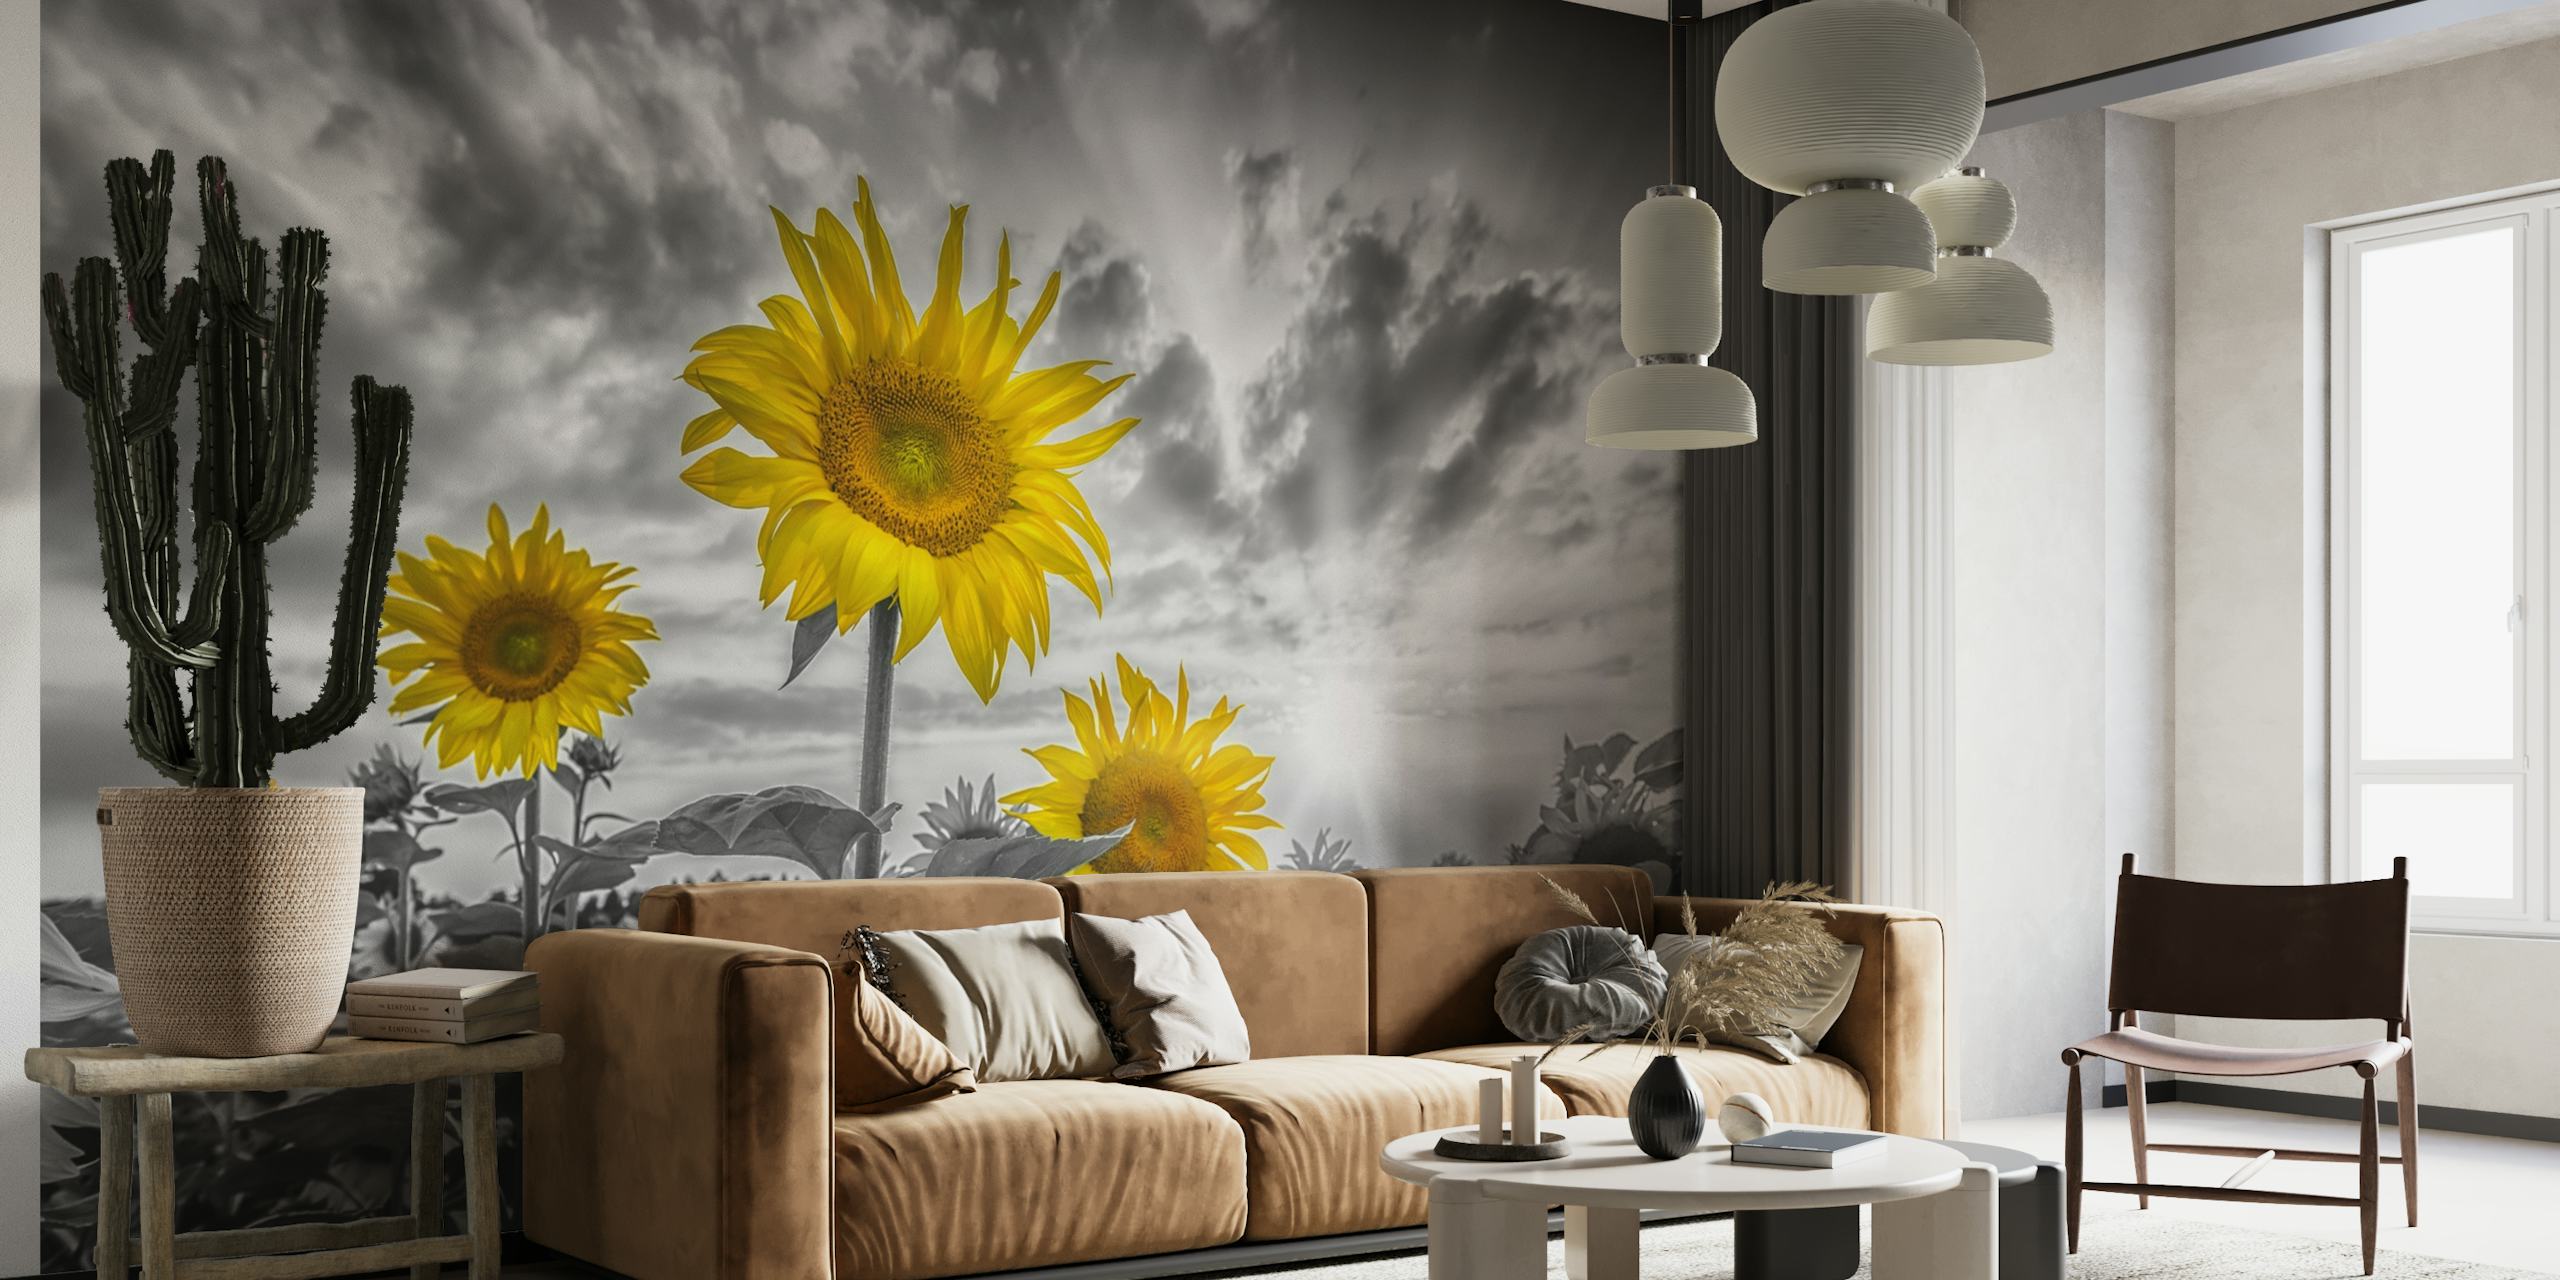 Color pop sunflowers in sunset behang